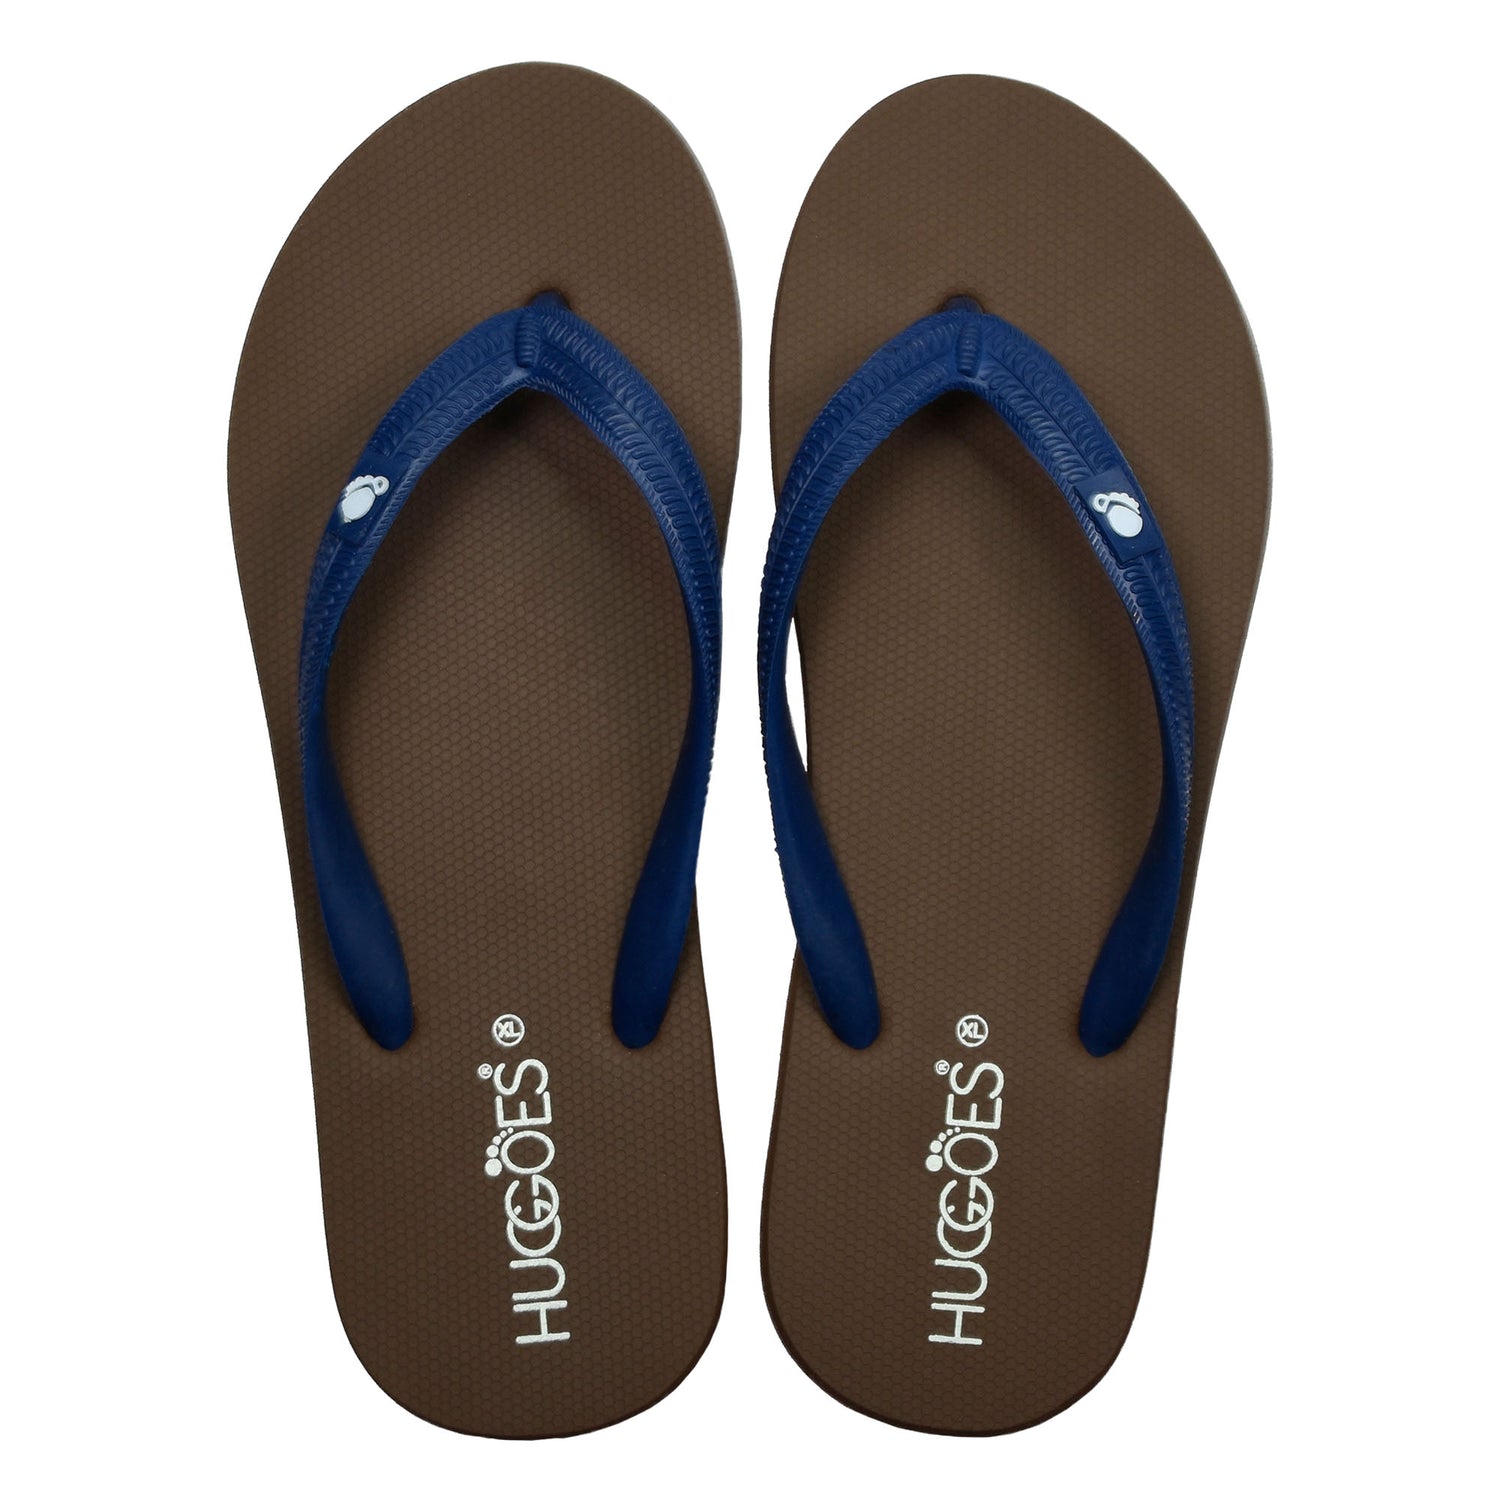 Huggoes by Aerothotic - Earthy Unisex Flip Flops Slippers - Original Thailand Imported - BR1/SN1